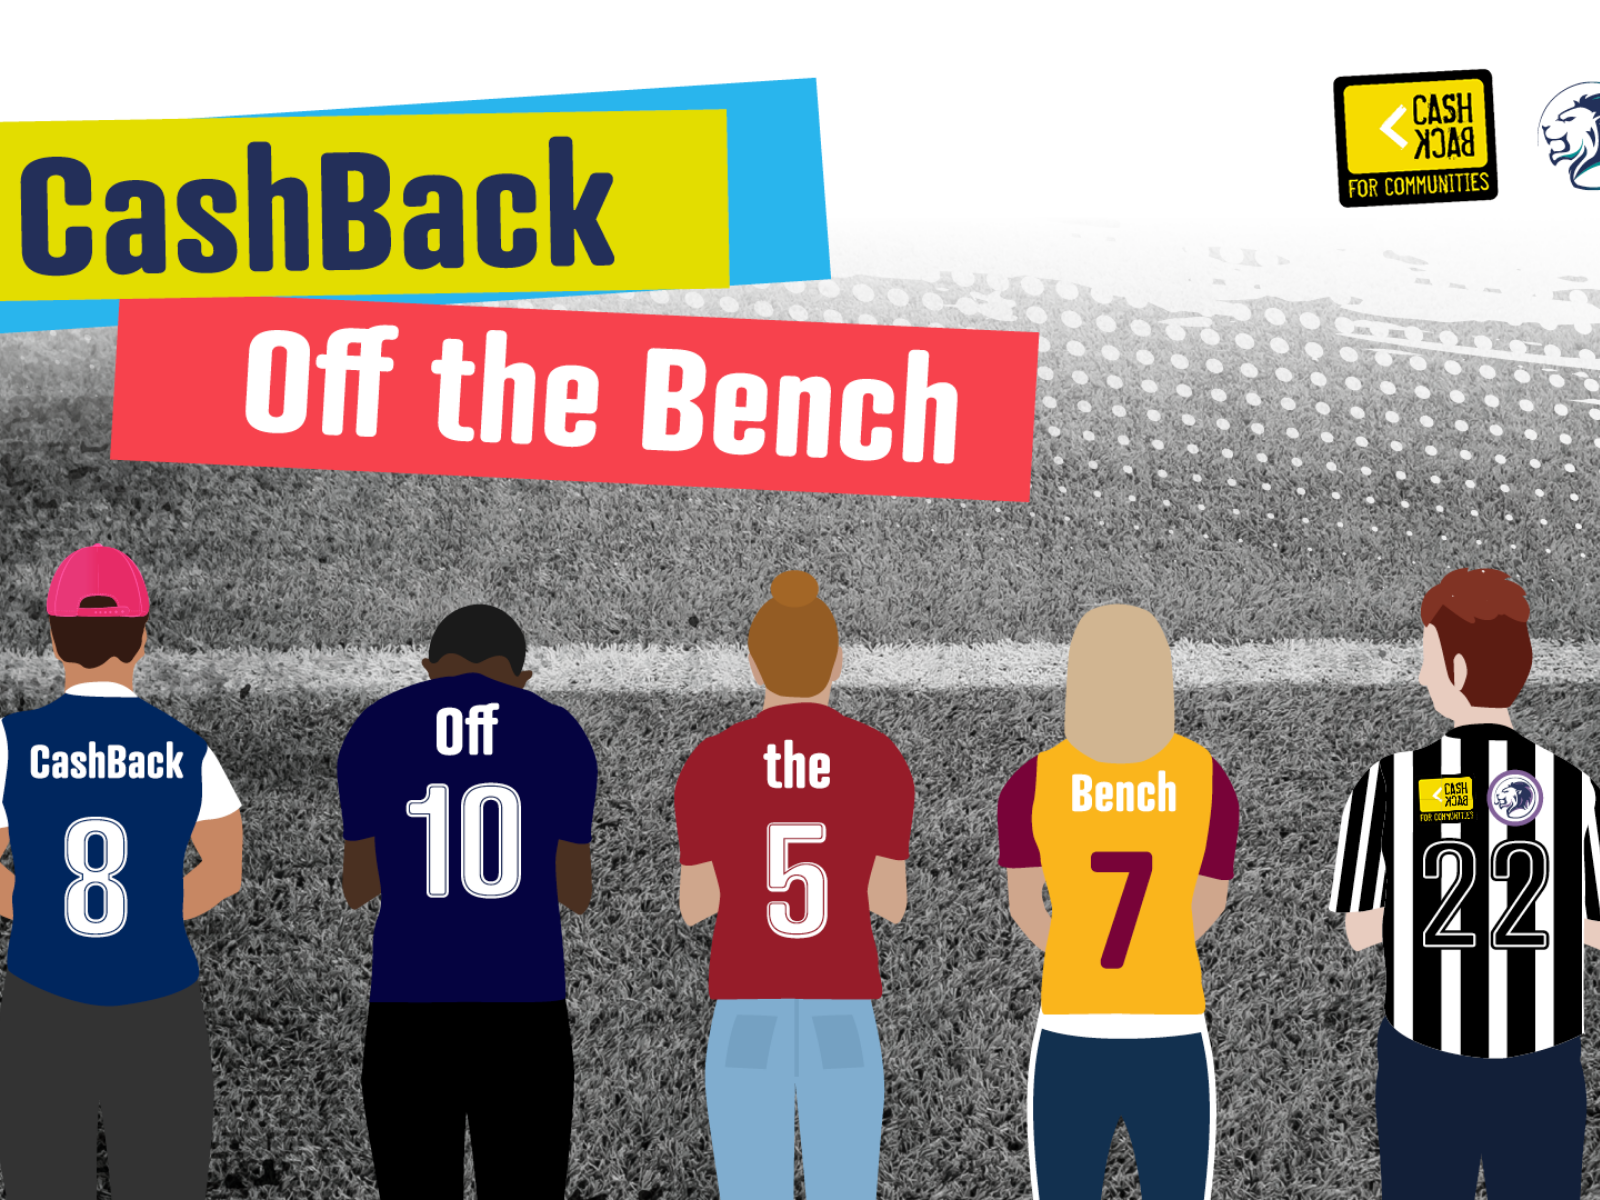  » Off the Bench back for a 2nd year: Registration open now!